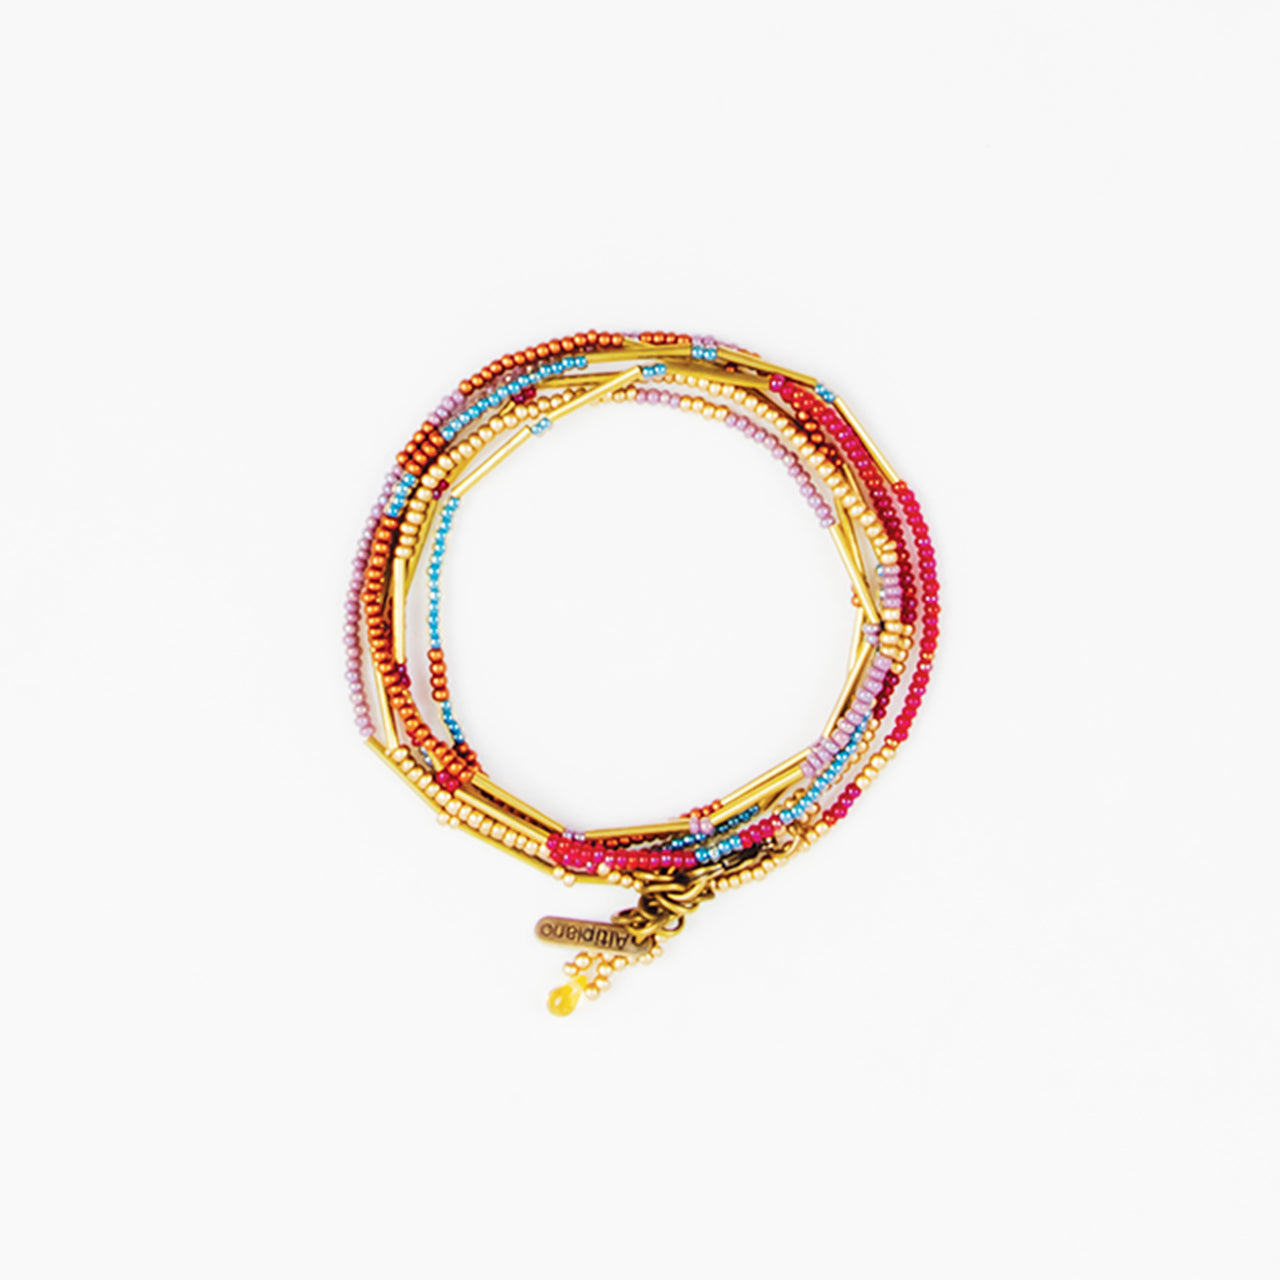 brass and bead necklace and wrap bracelet, altiplano, sustainably and ethically made, pink, turquoise, gold, orange and red